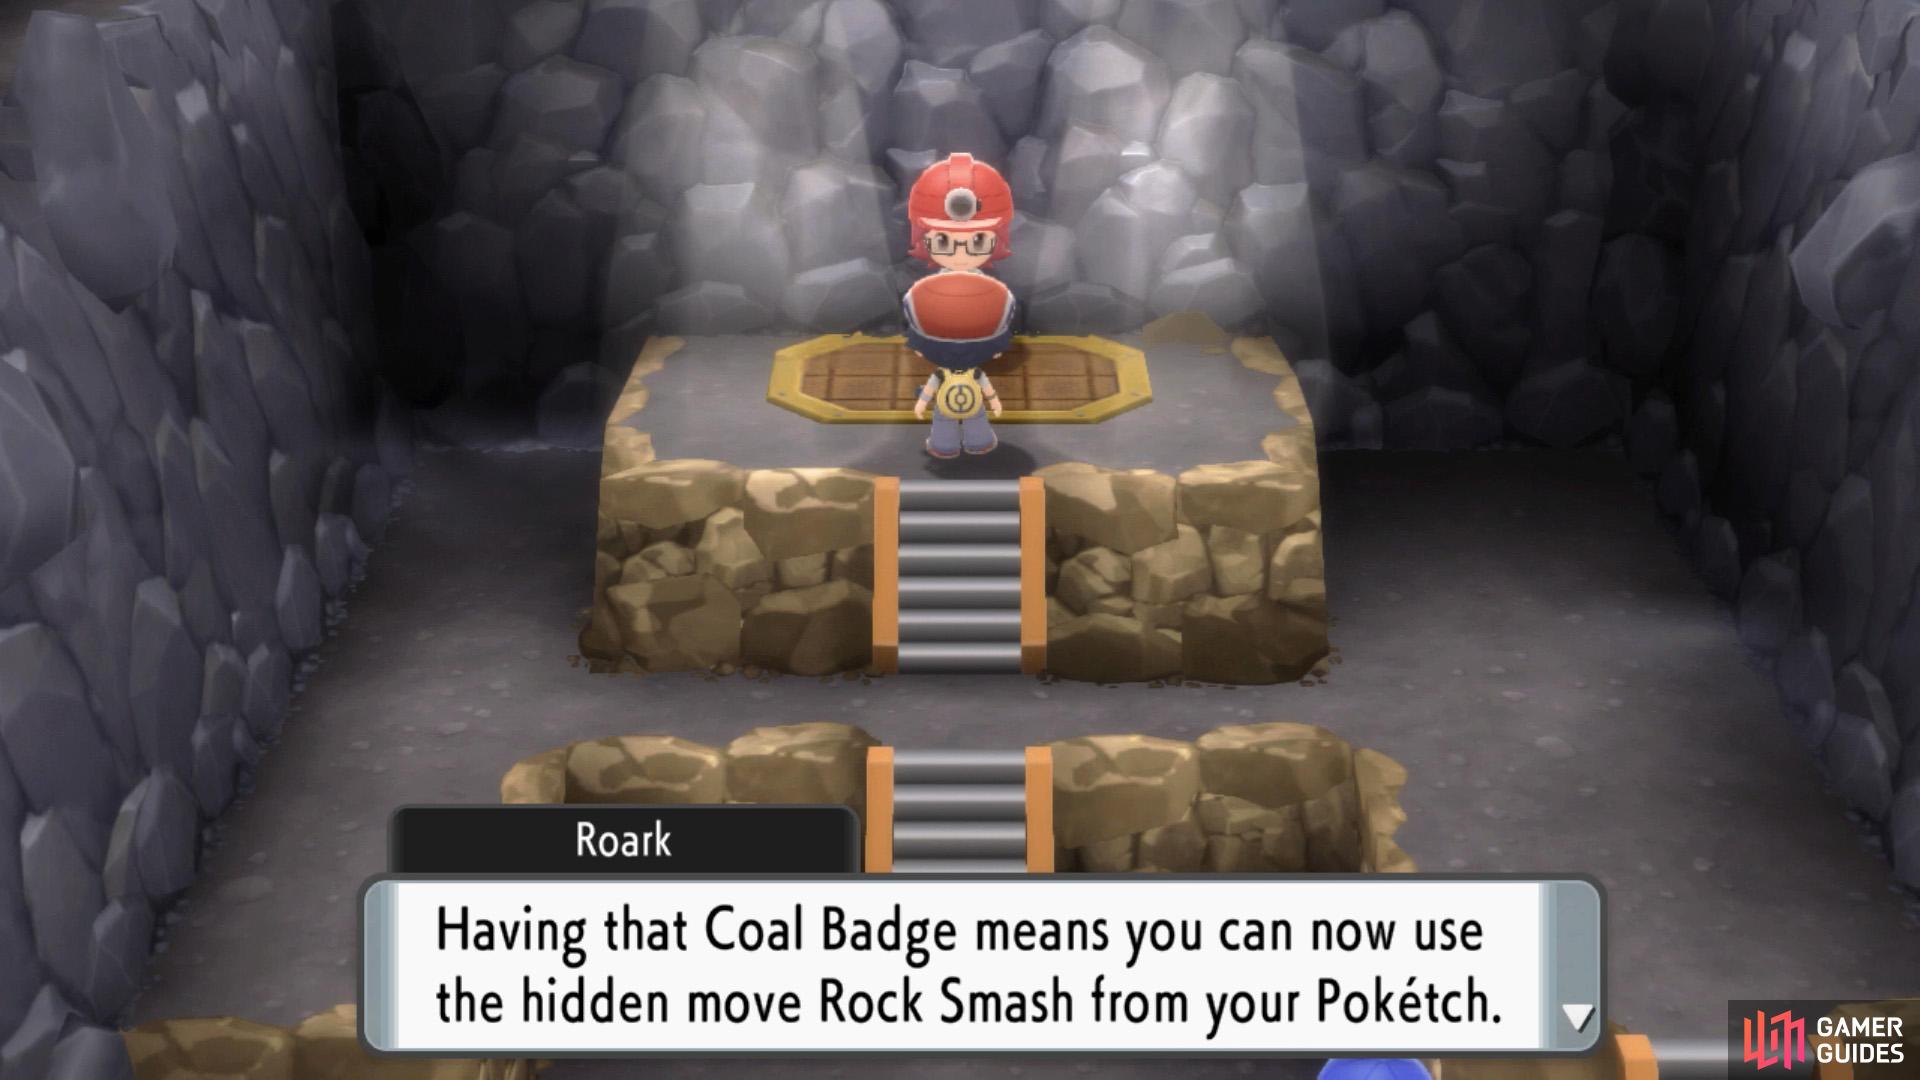 His Coal Badge will enable Rock Smash on your Pokétch.